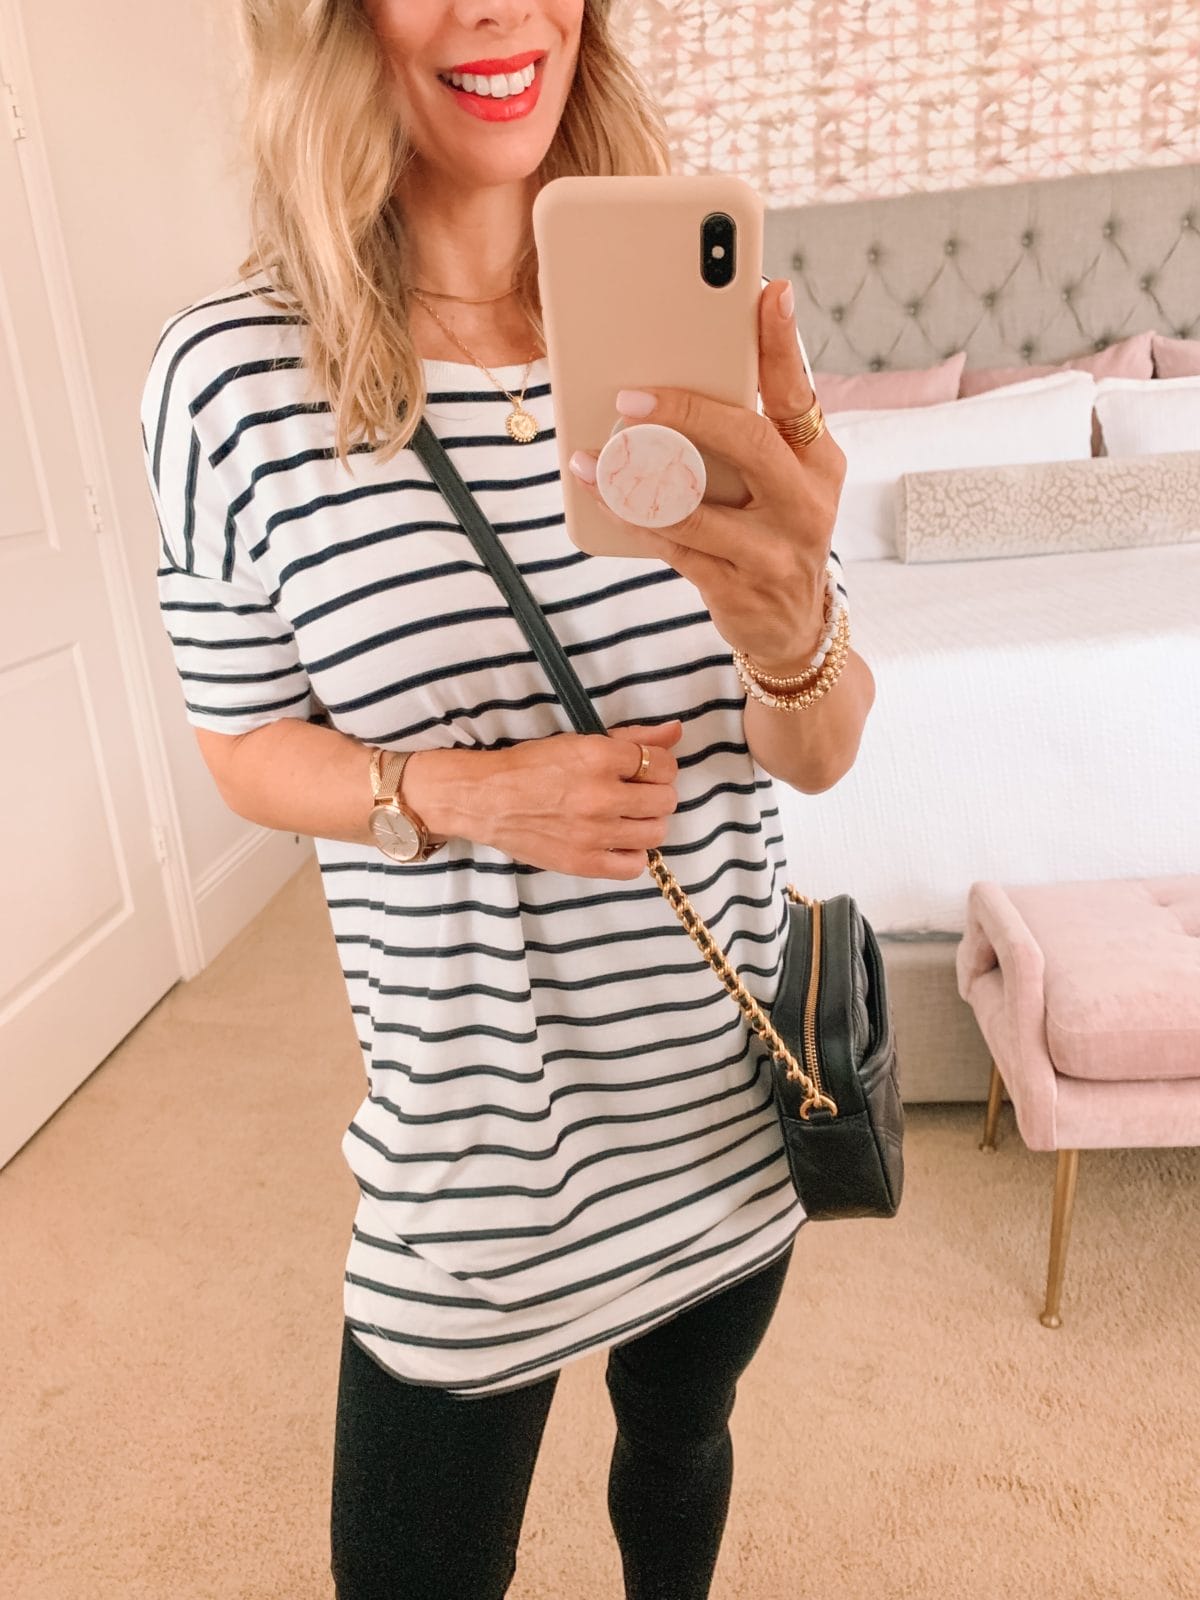 Amazon Fashion Faves, Stripe Tunic Top and Leggings and Flip Flops and crossbody 